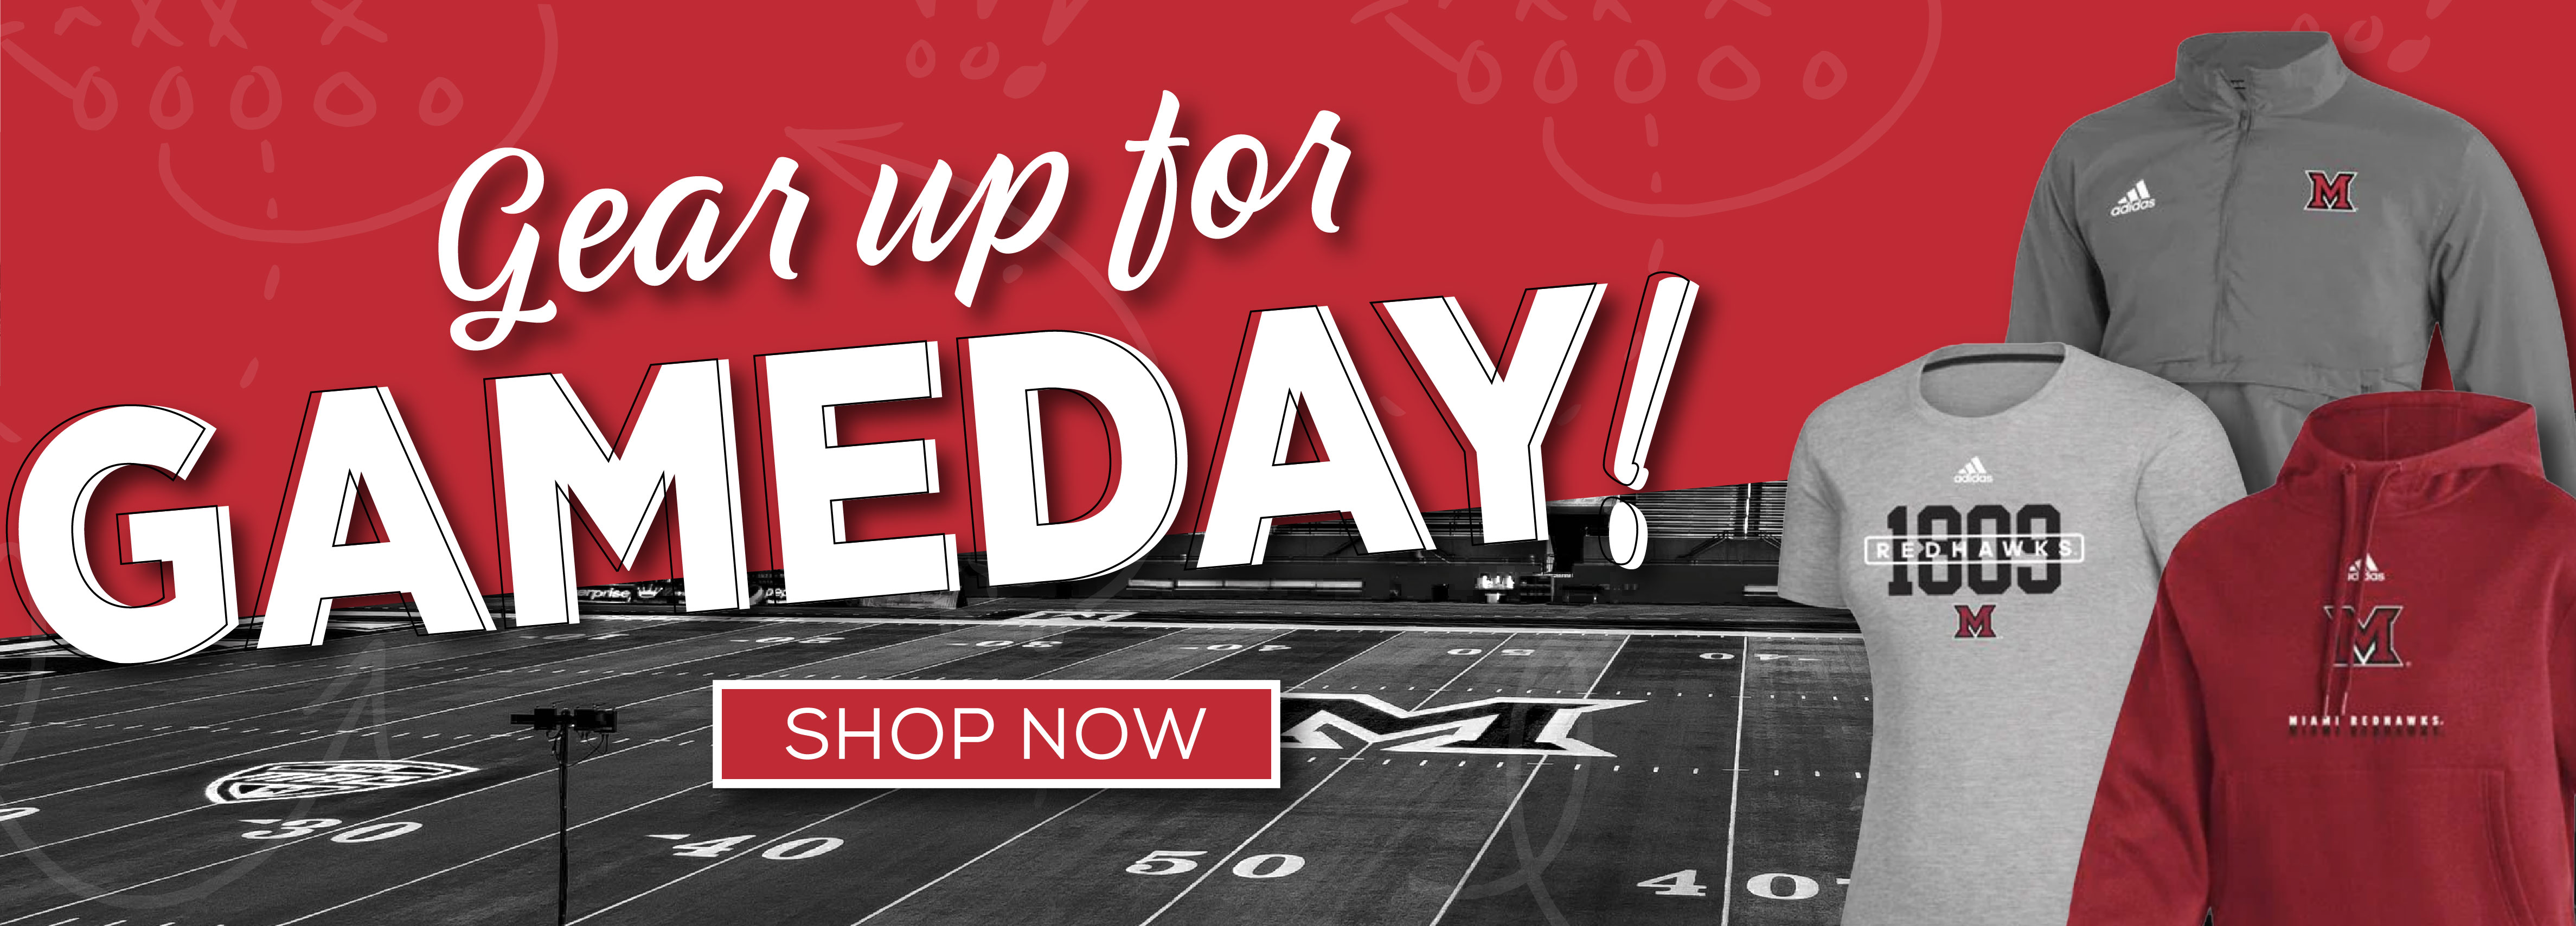 Gear up for GAMEDAY! Shop Now. Images of apparel: 1809 Miami adidas T-Shirt, Grey quarter zip, and red adidas hoodie on a split red background with image of football field.